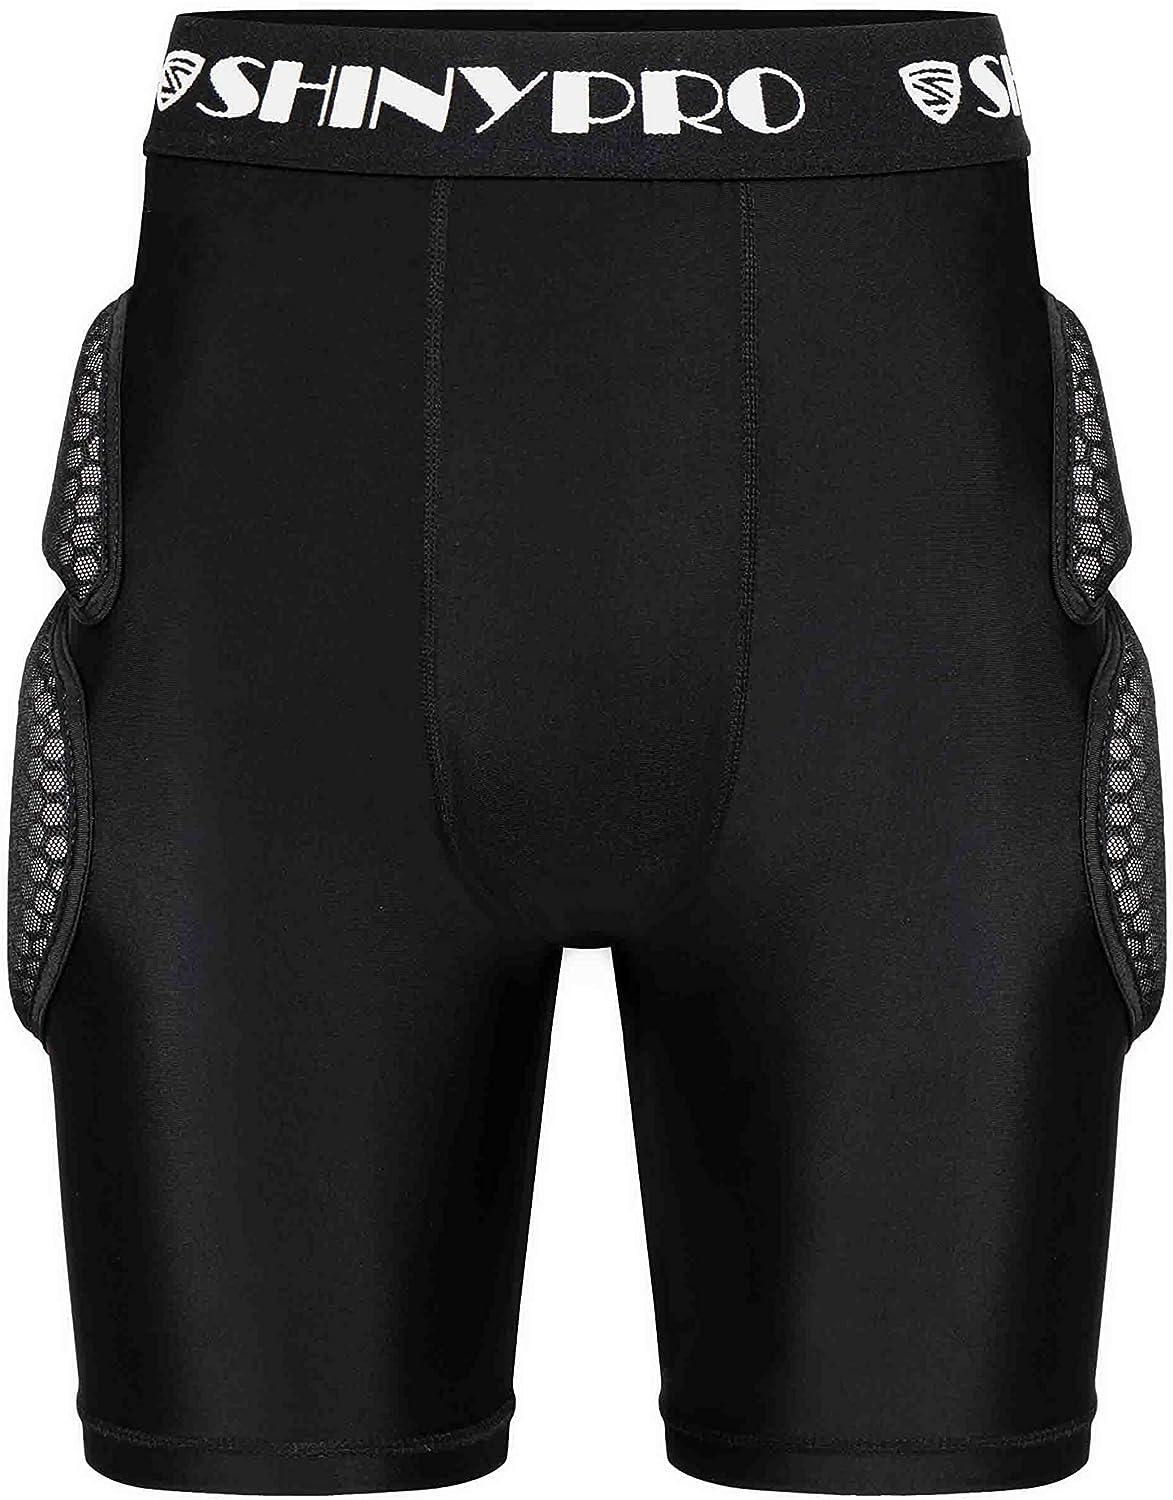 SHINYPRO Protective Padded Shorts for Snowboard and Skate,Overall 3D  Protection,Butt and Tailbone Heavy Duty Protection Medium